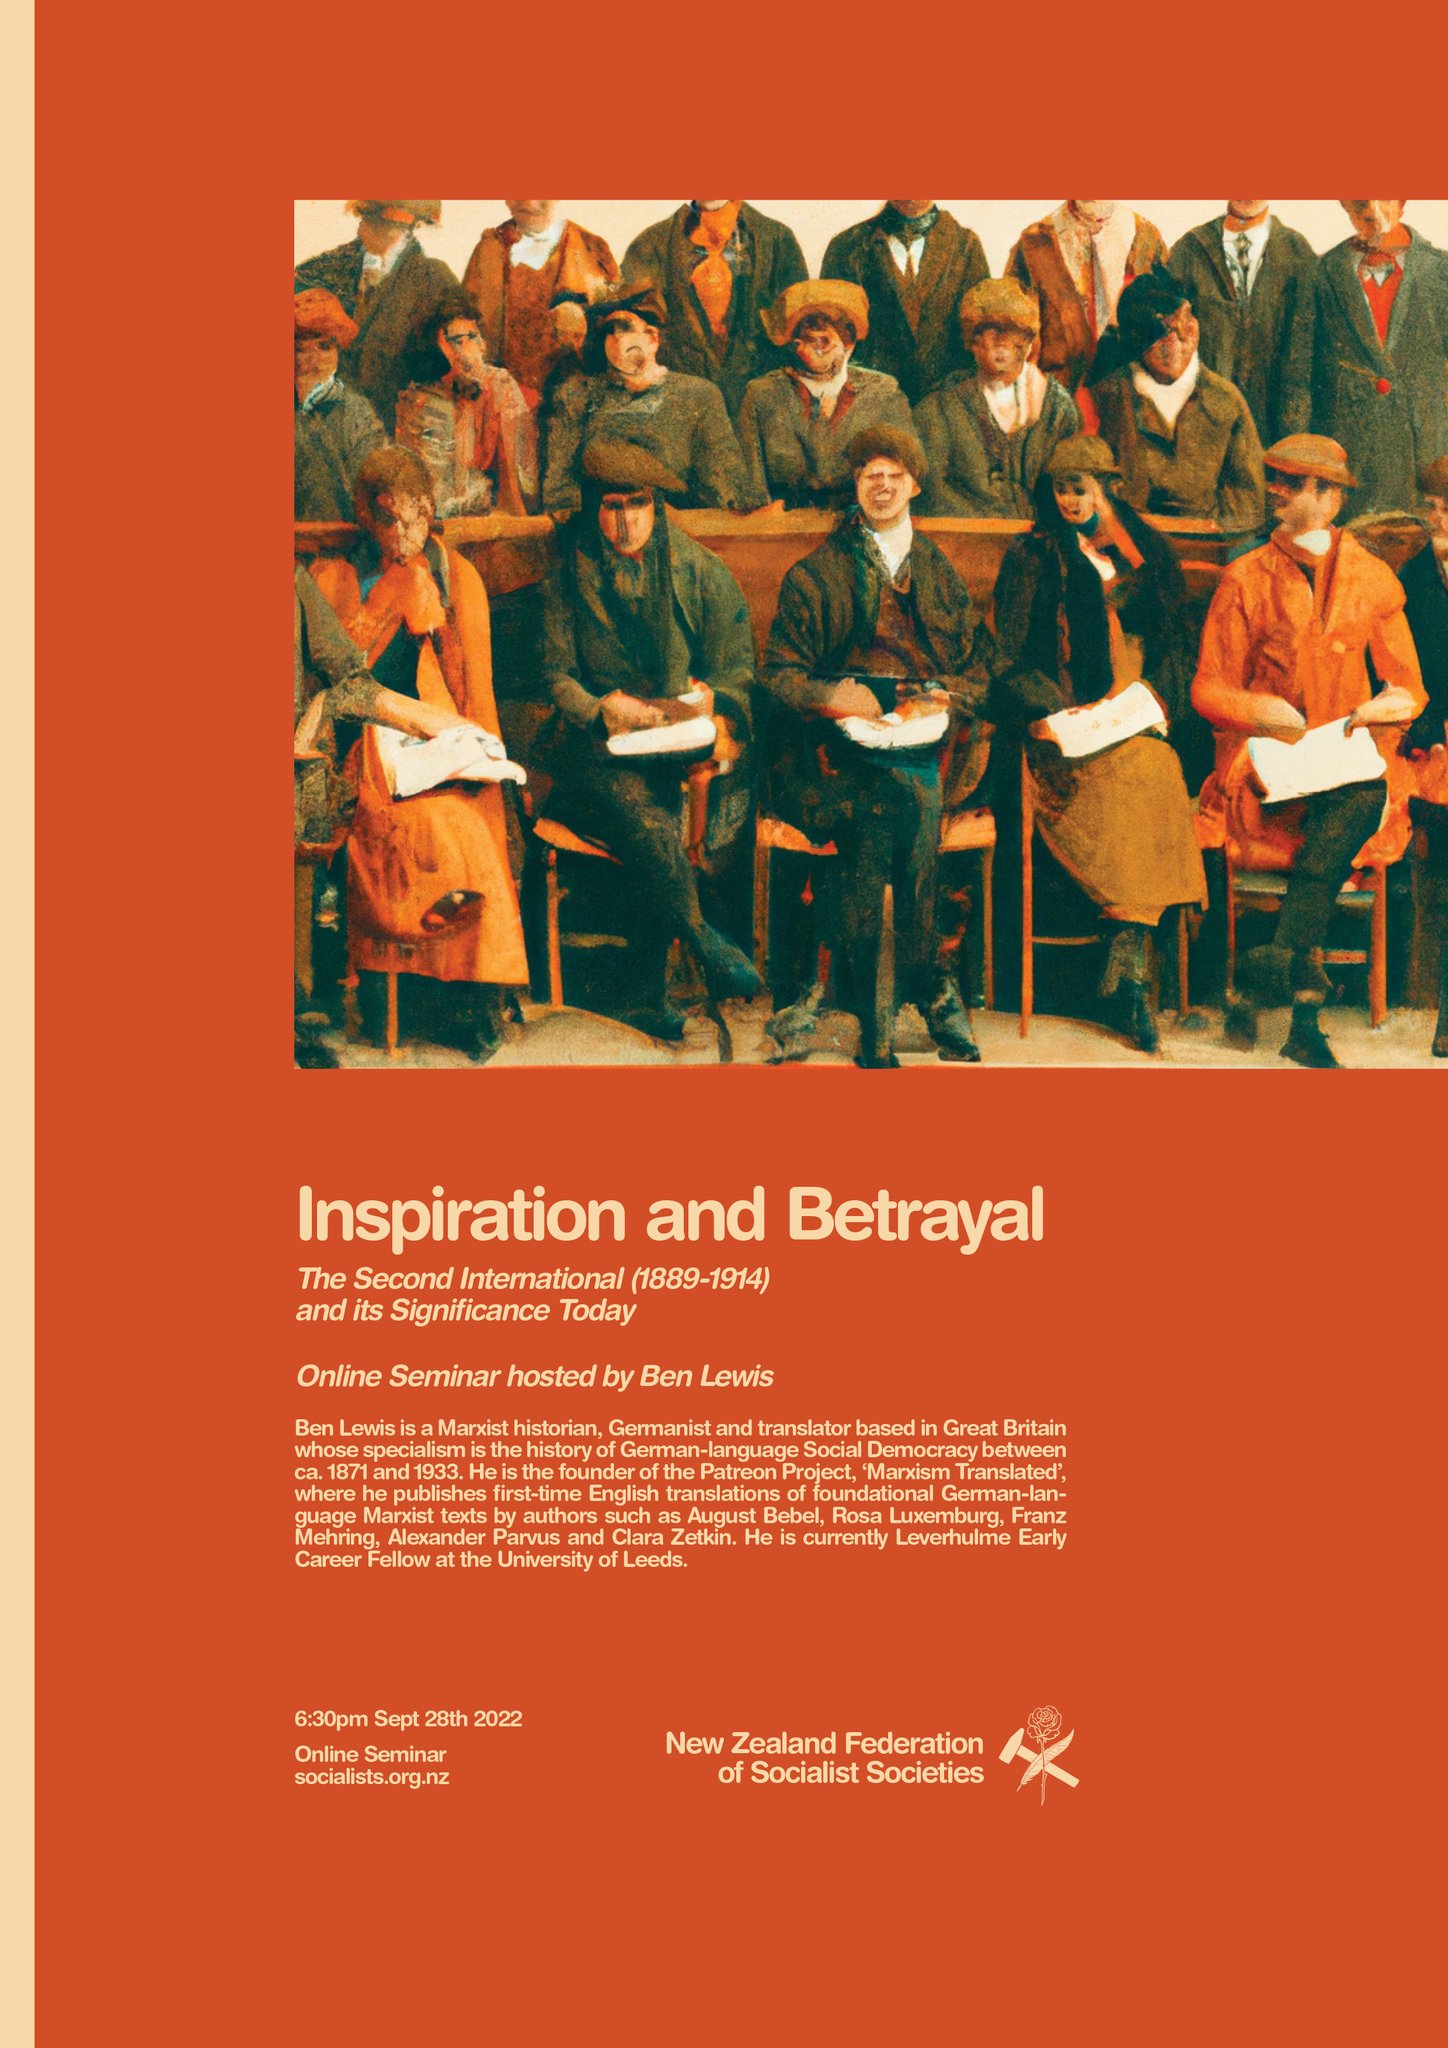 Inspiration and Betrayal: The Second International (1889-1914) and its Significance Today